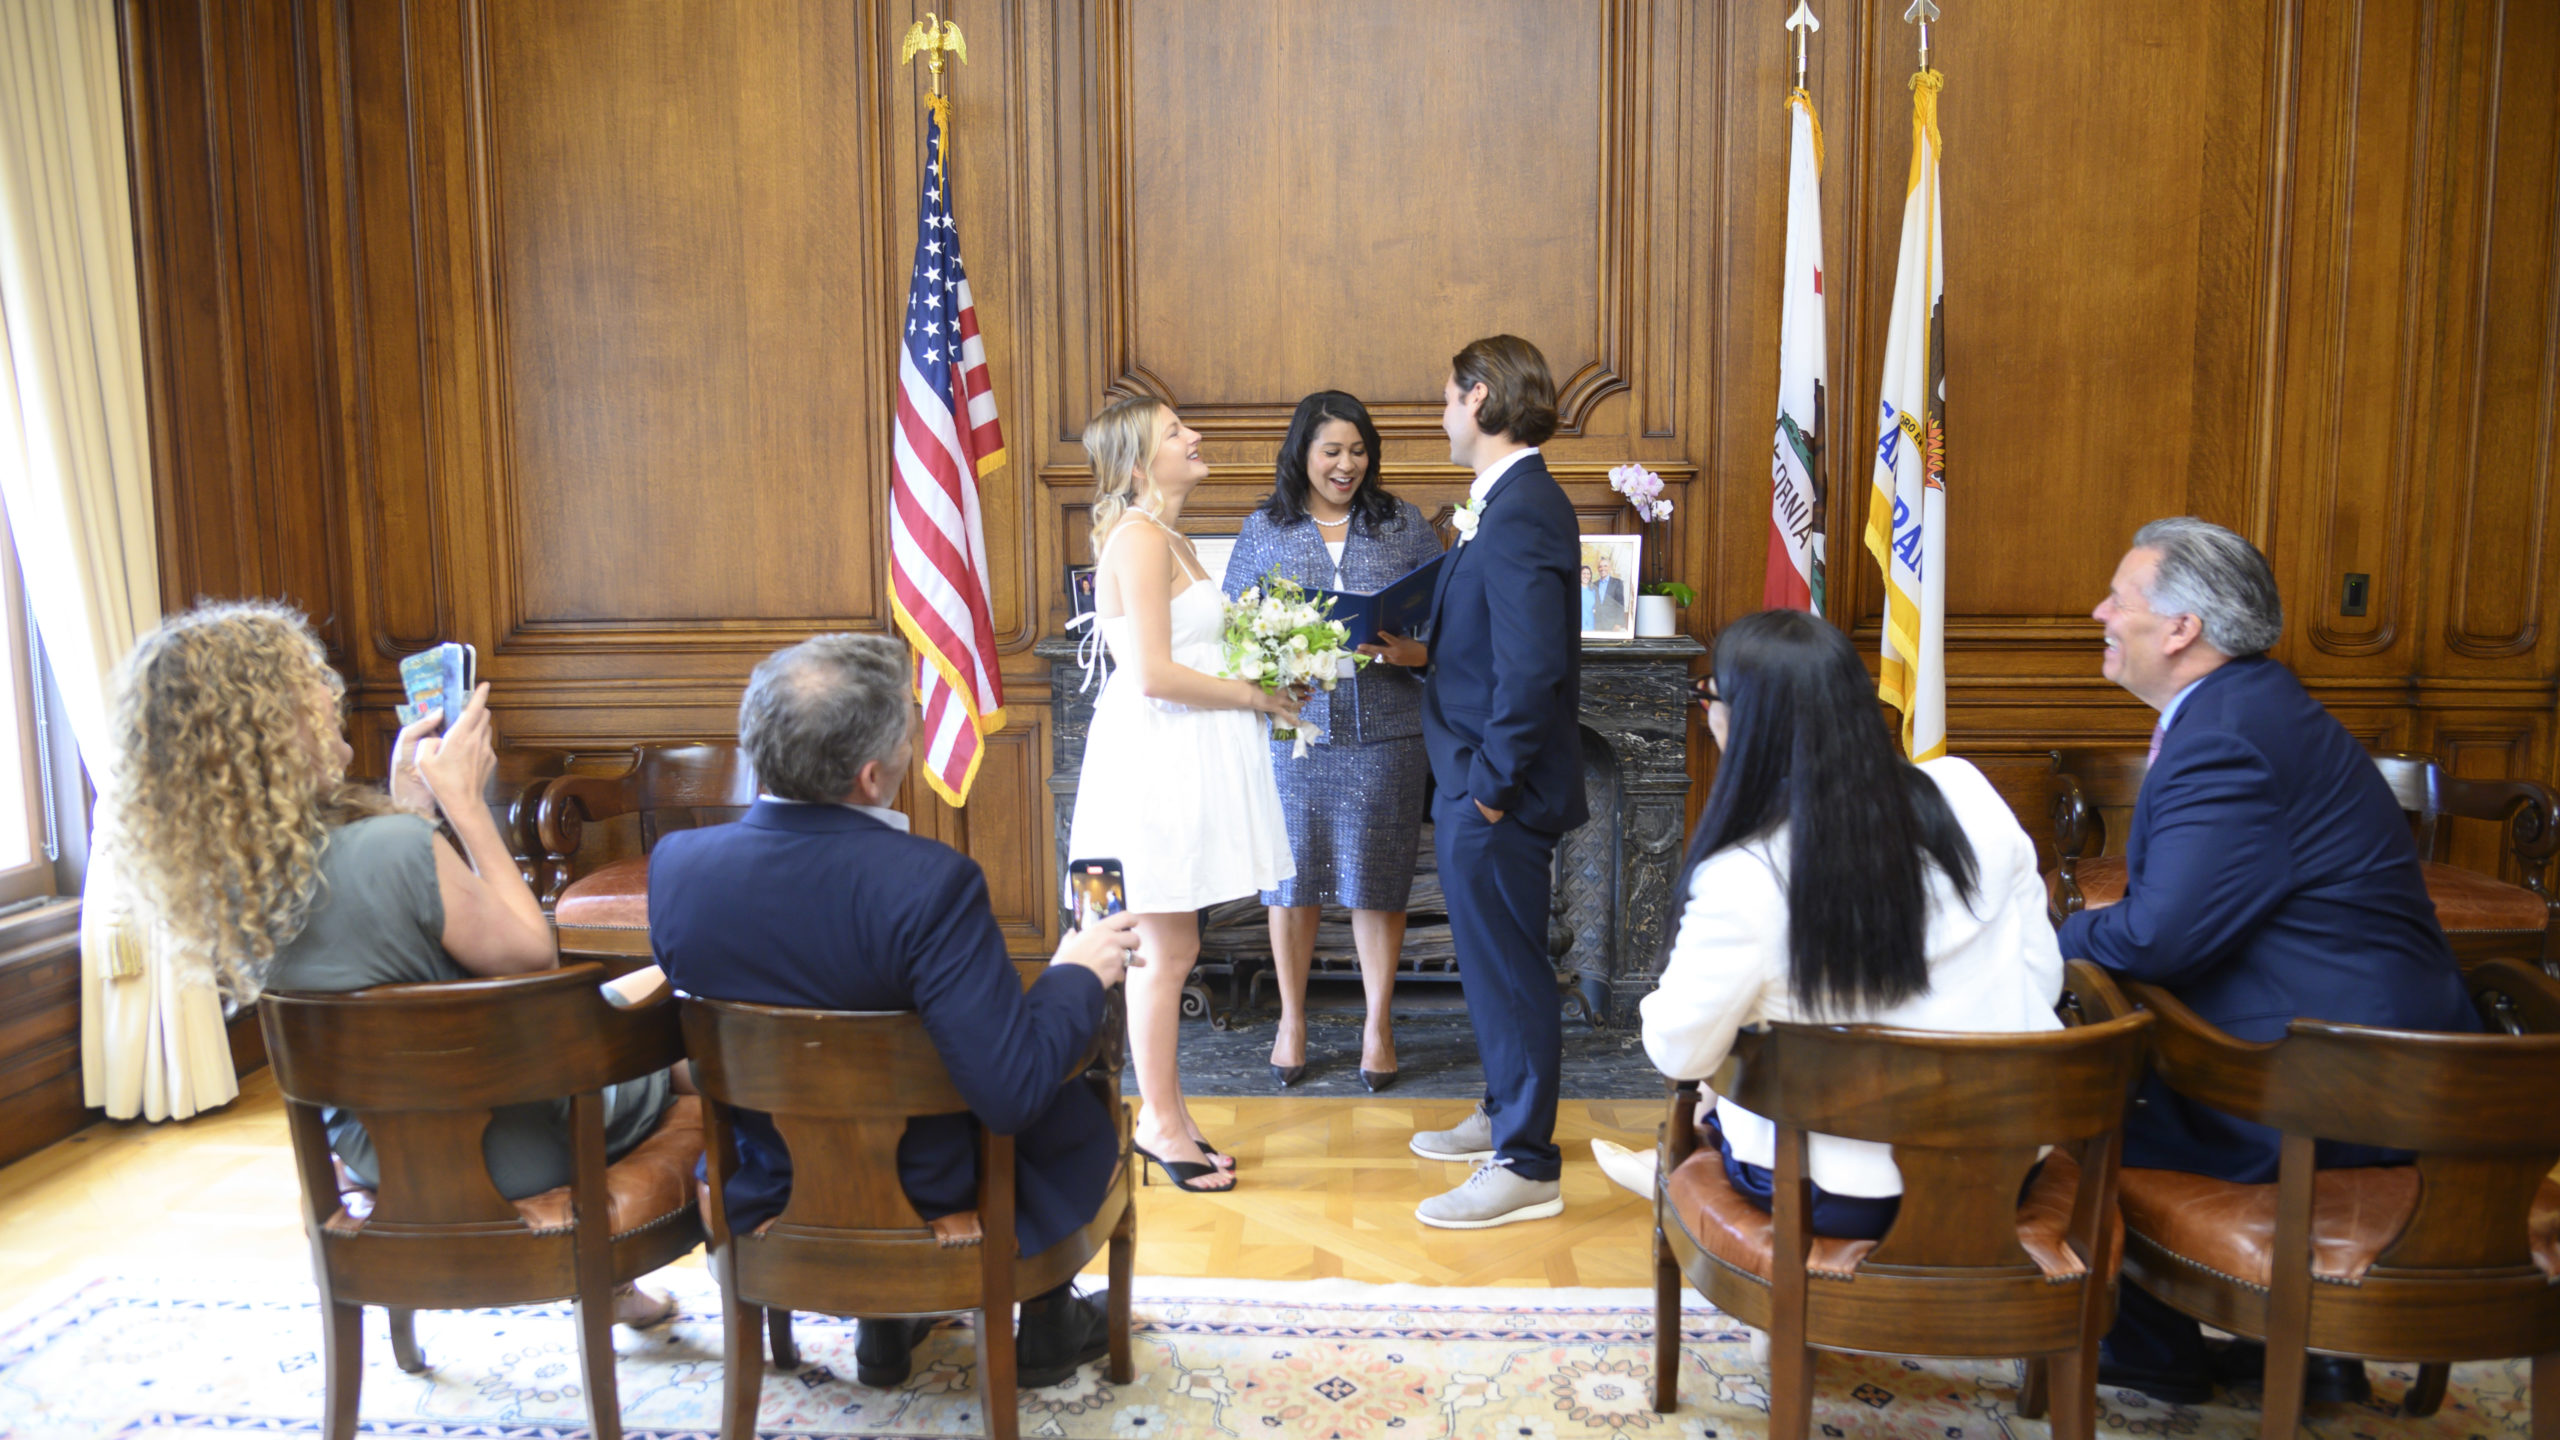 San Francisco Mayor, London Breed performing a civil ceremony in her office